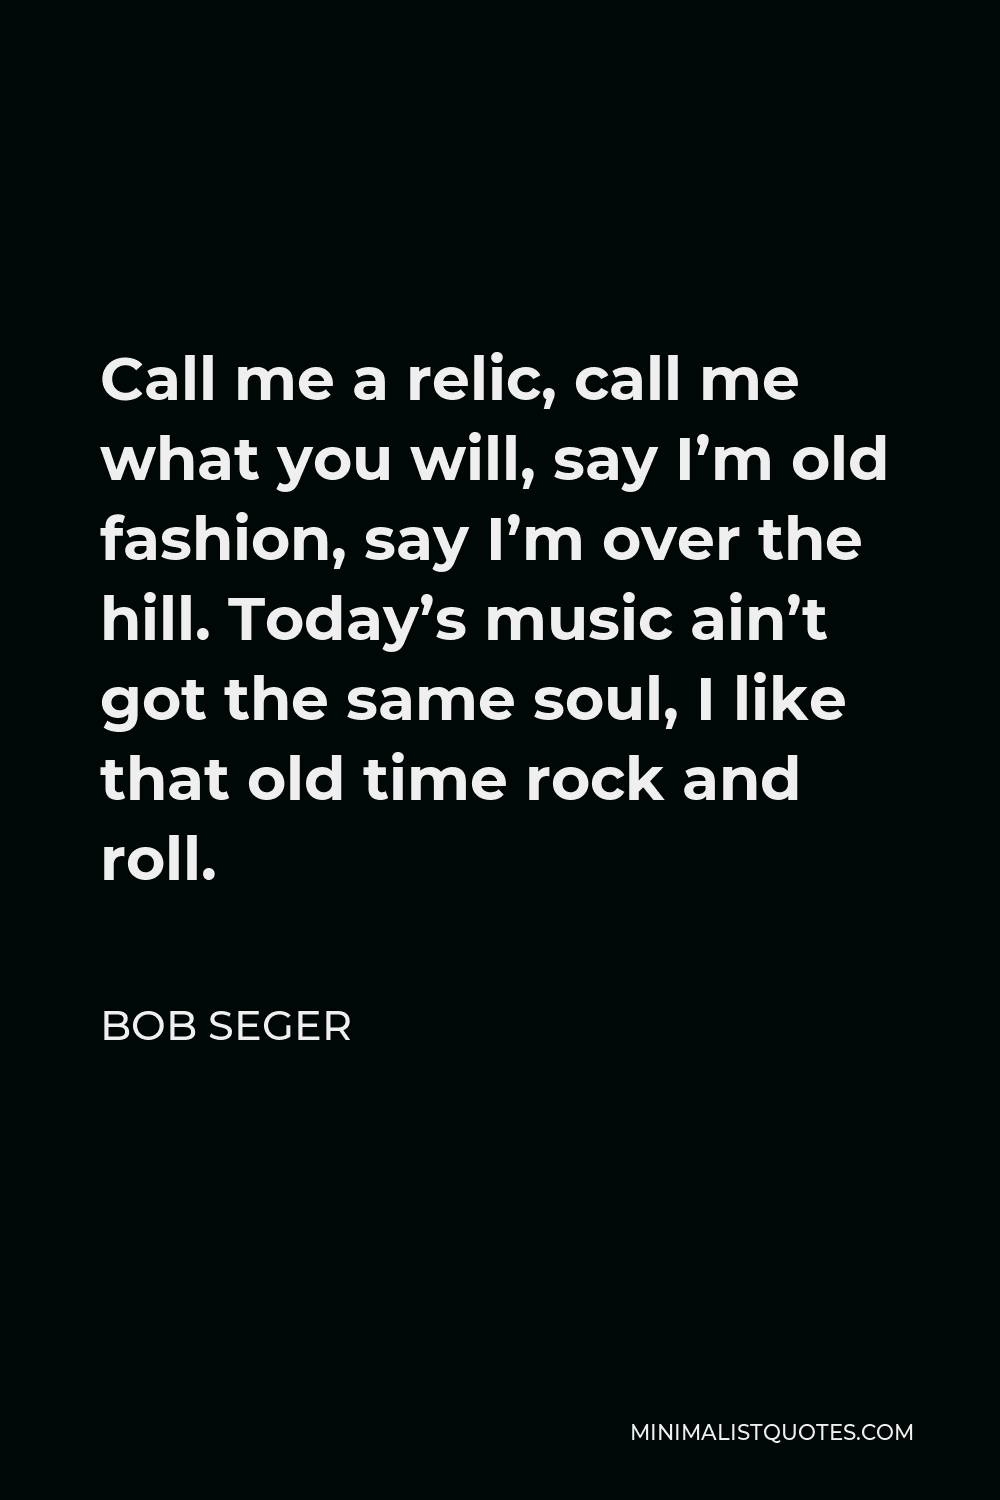 Bob Seger Quote - Call me a relic, call me what you will, say I’m old fashion, say I’m over the hill. Today’s music ain’t got the same soul, I like that old time rock and roll.